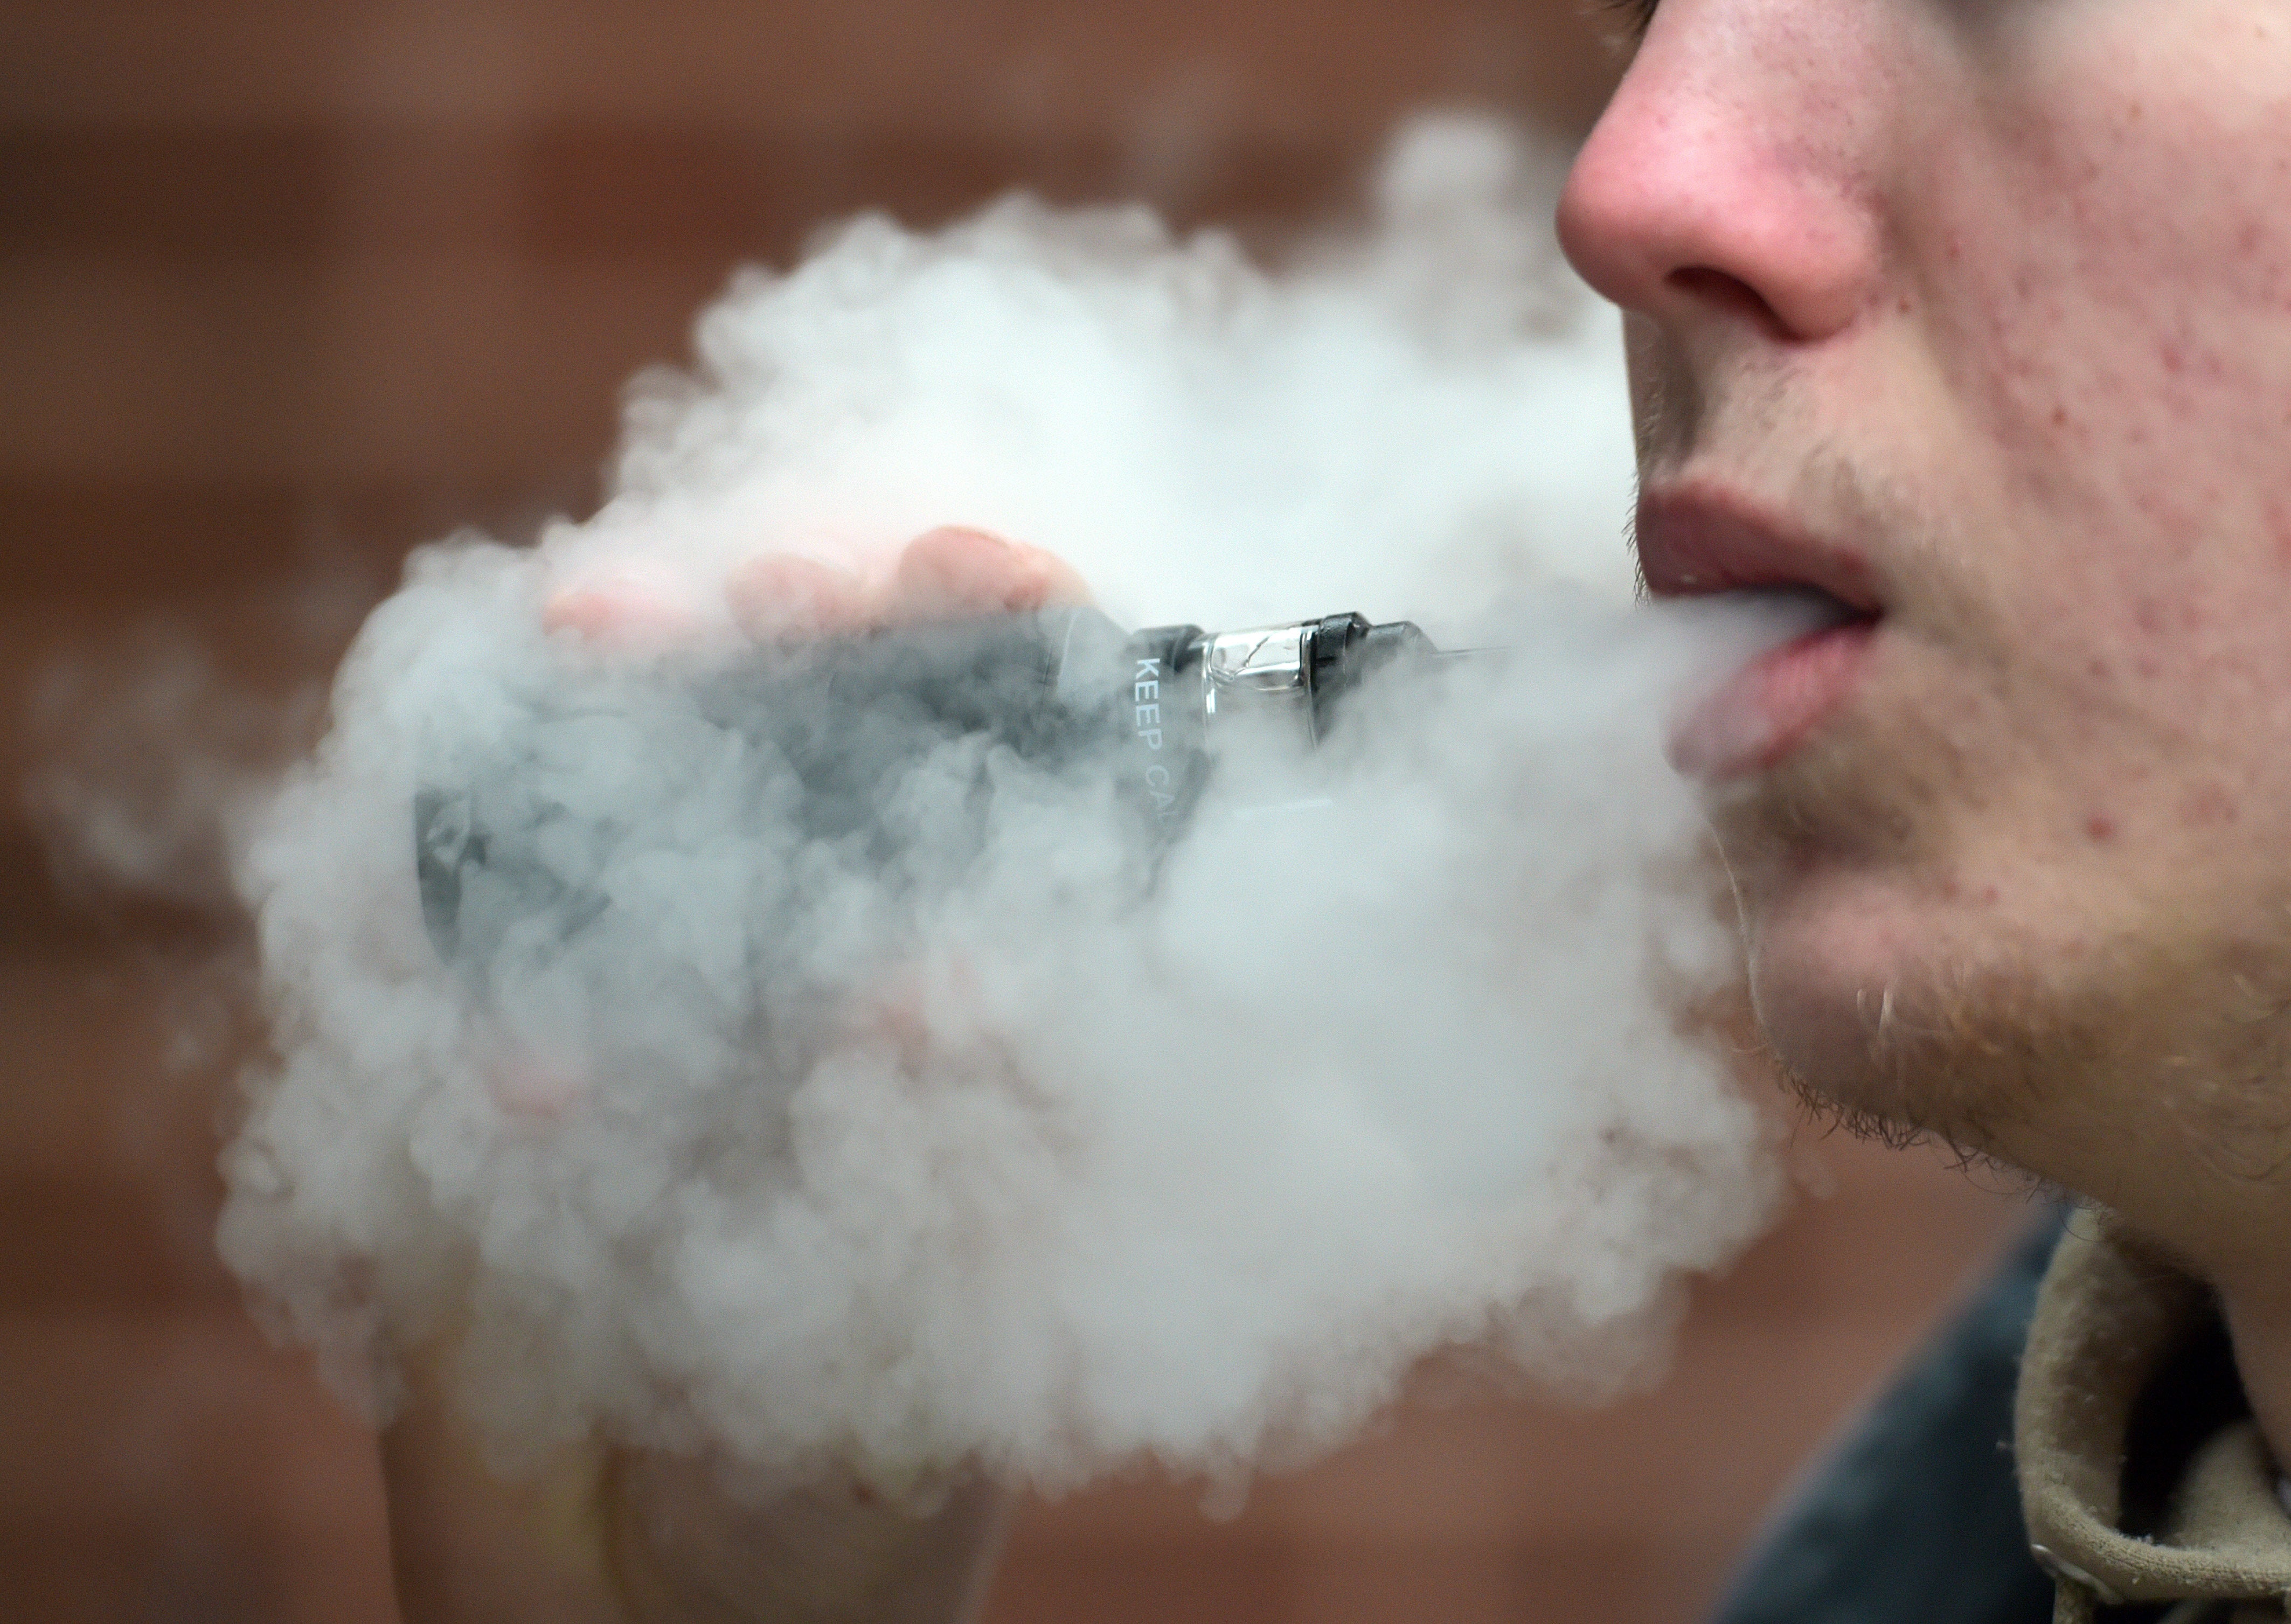 Vaping has reached record levels in Britain, according to a new report (PA)